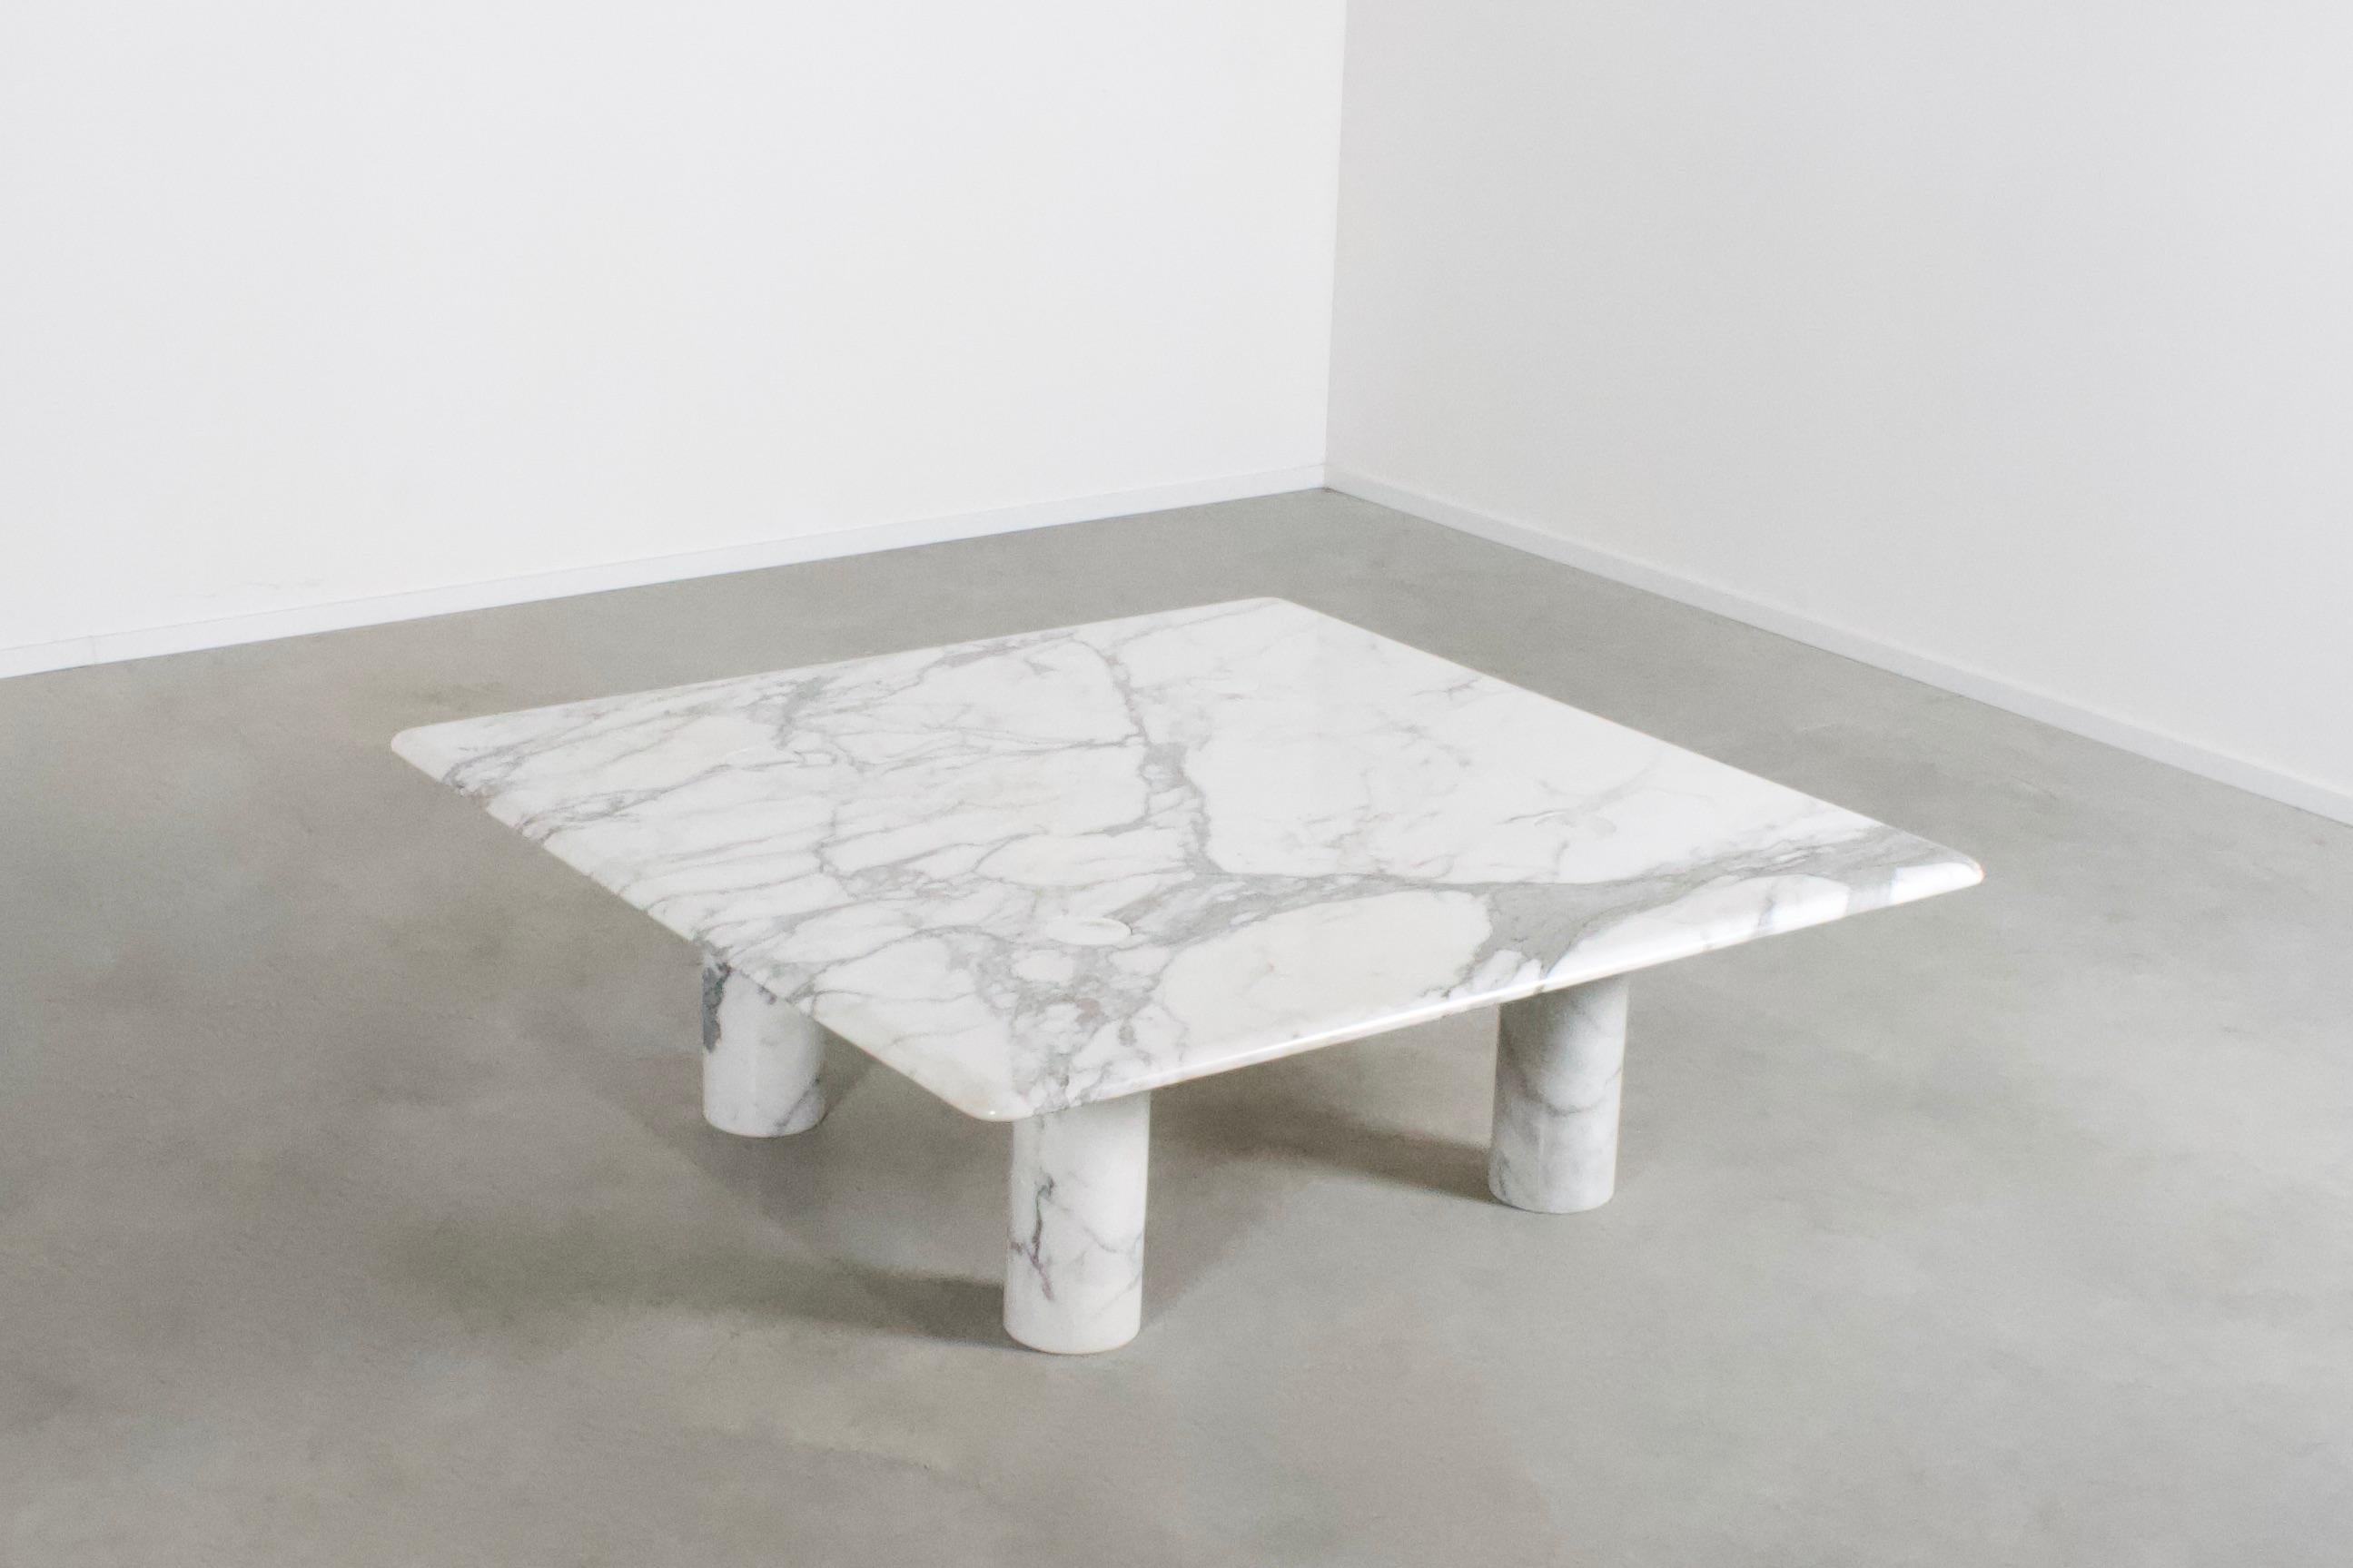 Large marble coffee table by Angelo Mangiarotti in very good condition.

This sculptural coffee table is manufactured by Up&Up, Italy in the 1970s.

Both the top and legs are executed in beautiful Carrara marble.

The heavy top rests on the column